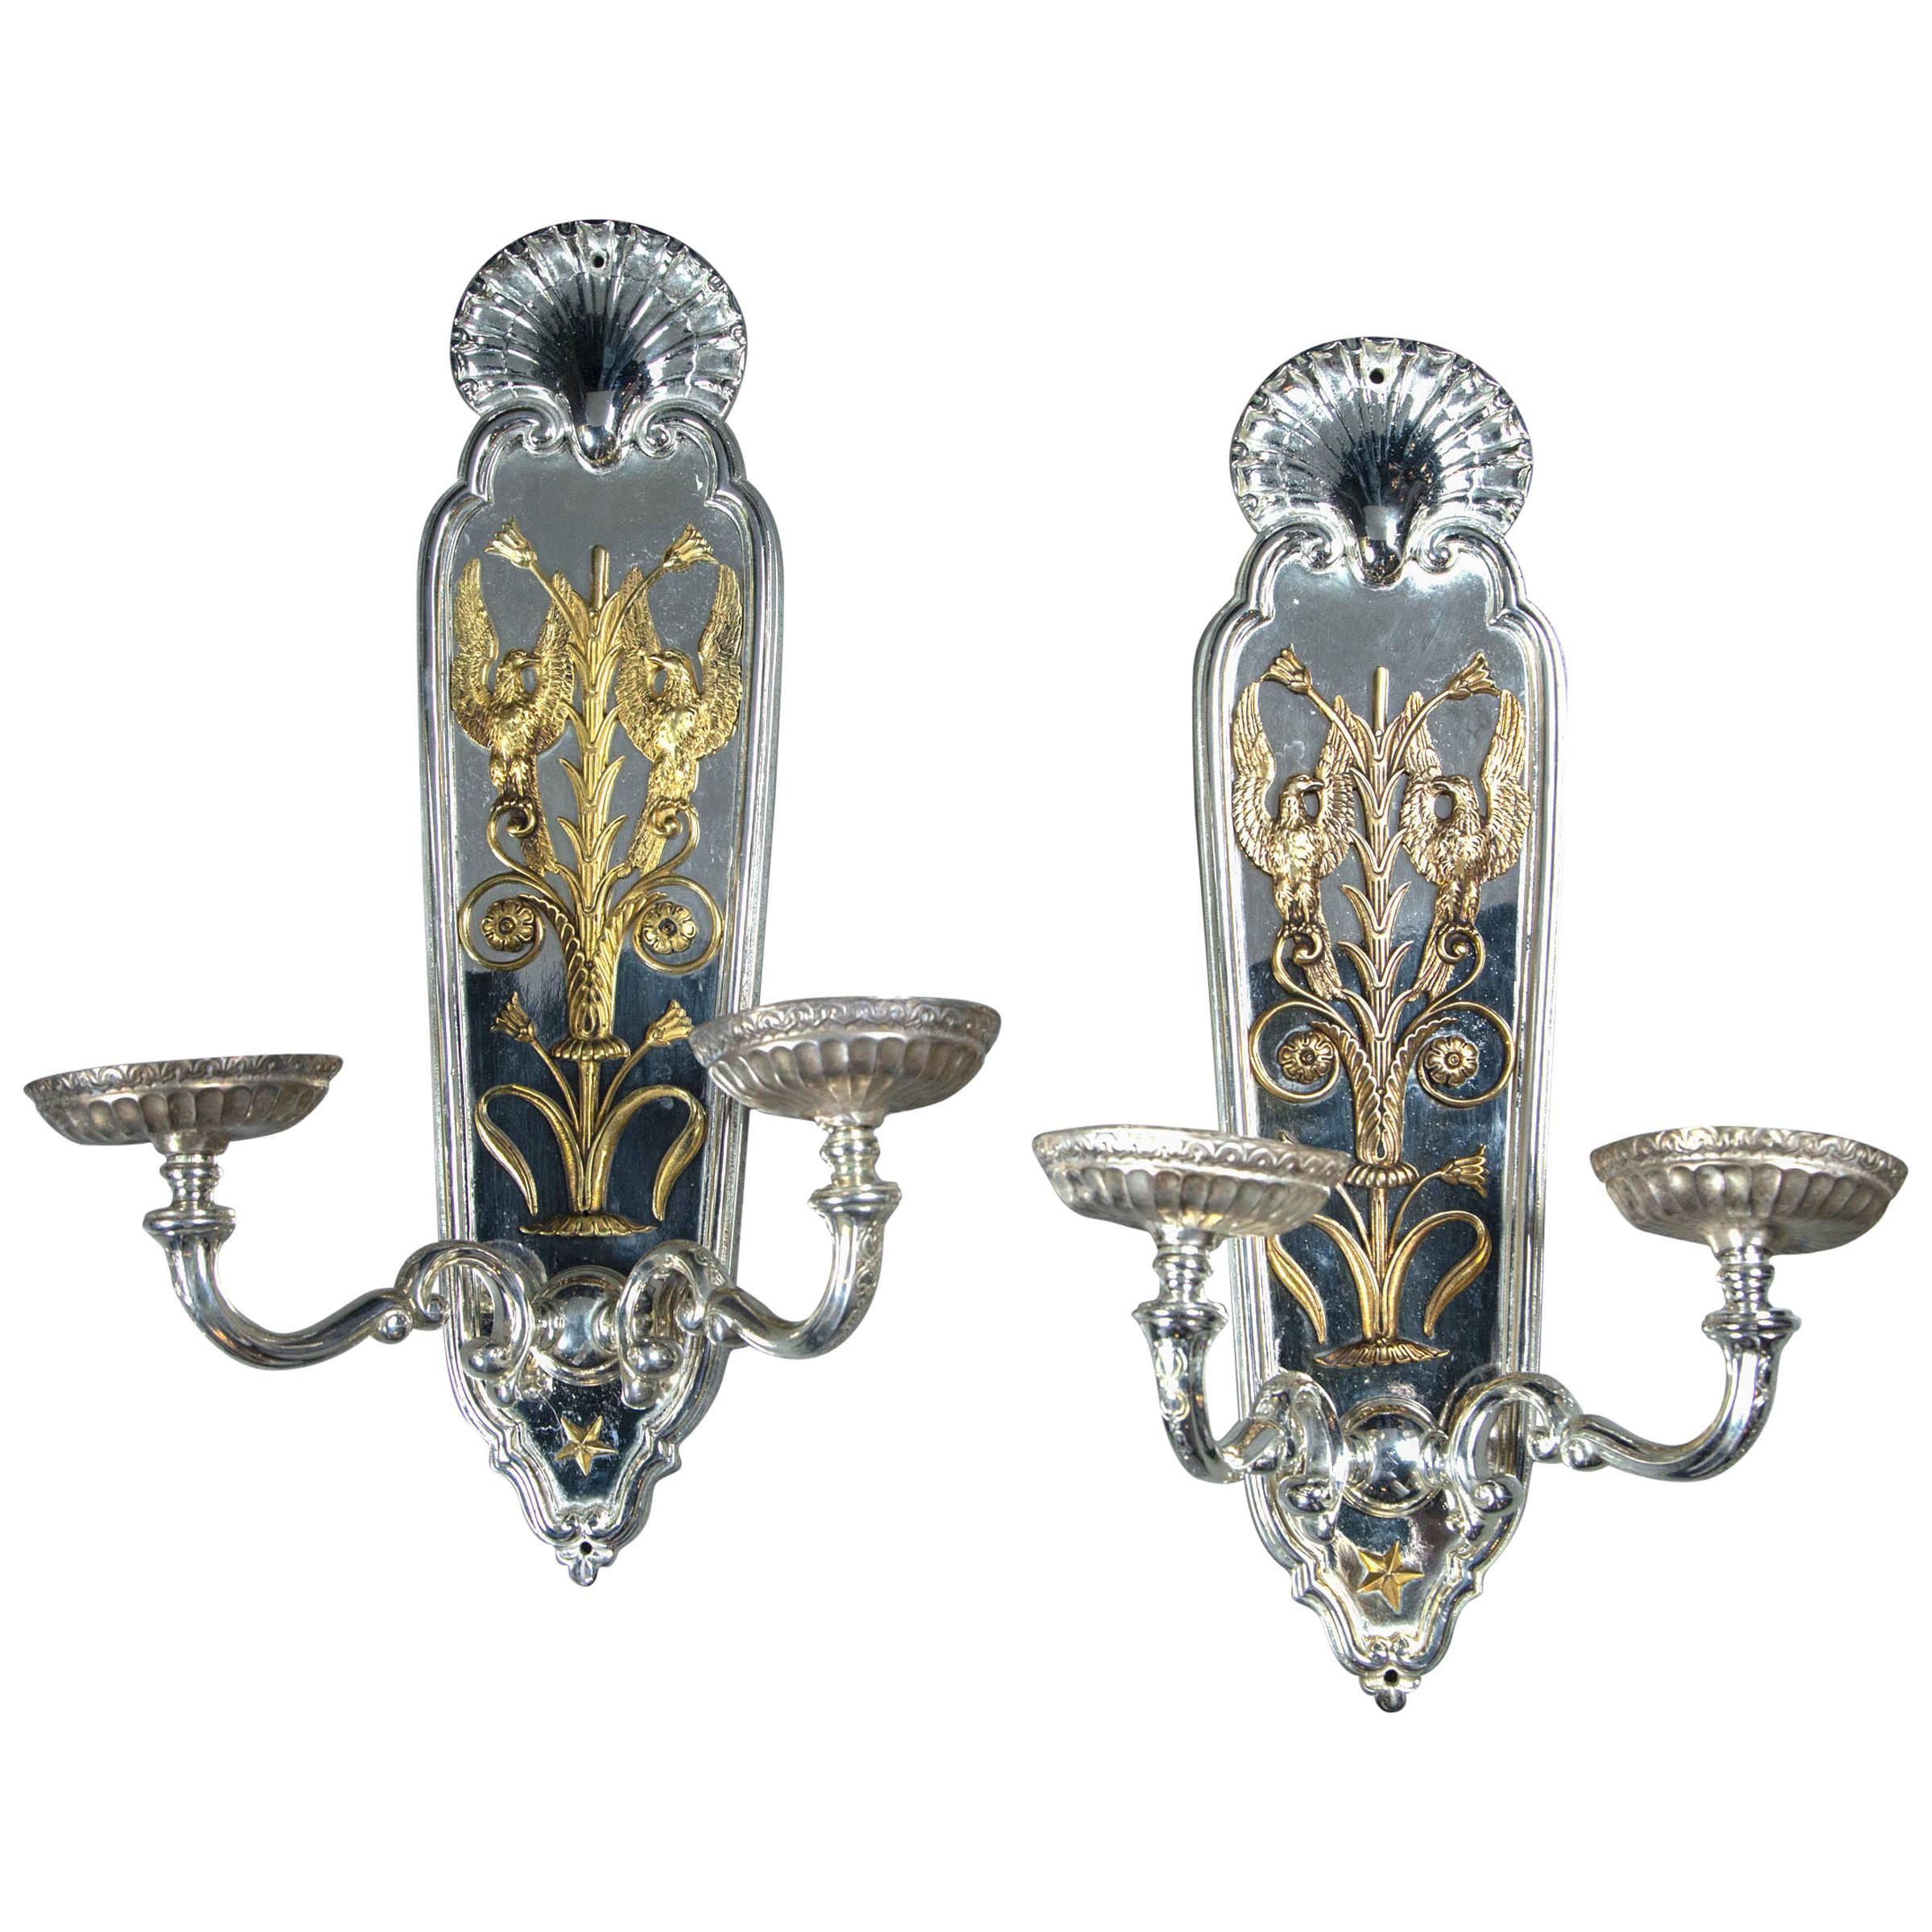 Pair of circa 1920 Silver Plated Caldwell Sconces with Gilt Bronze Design For Sale